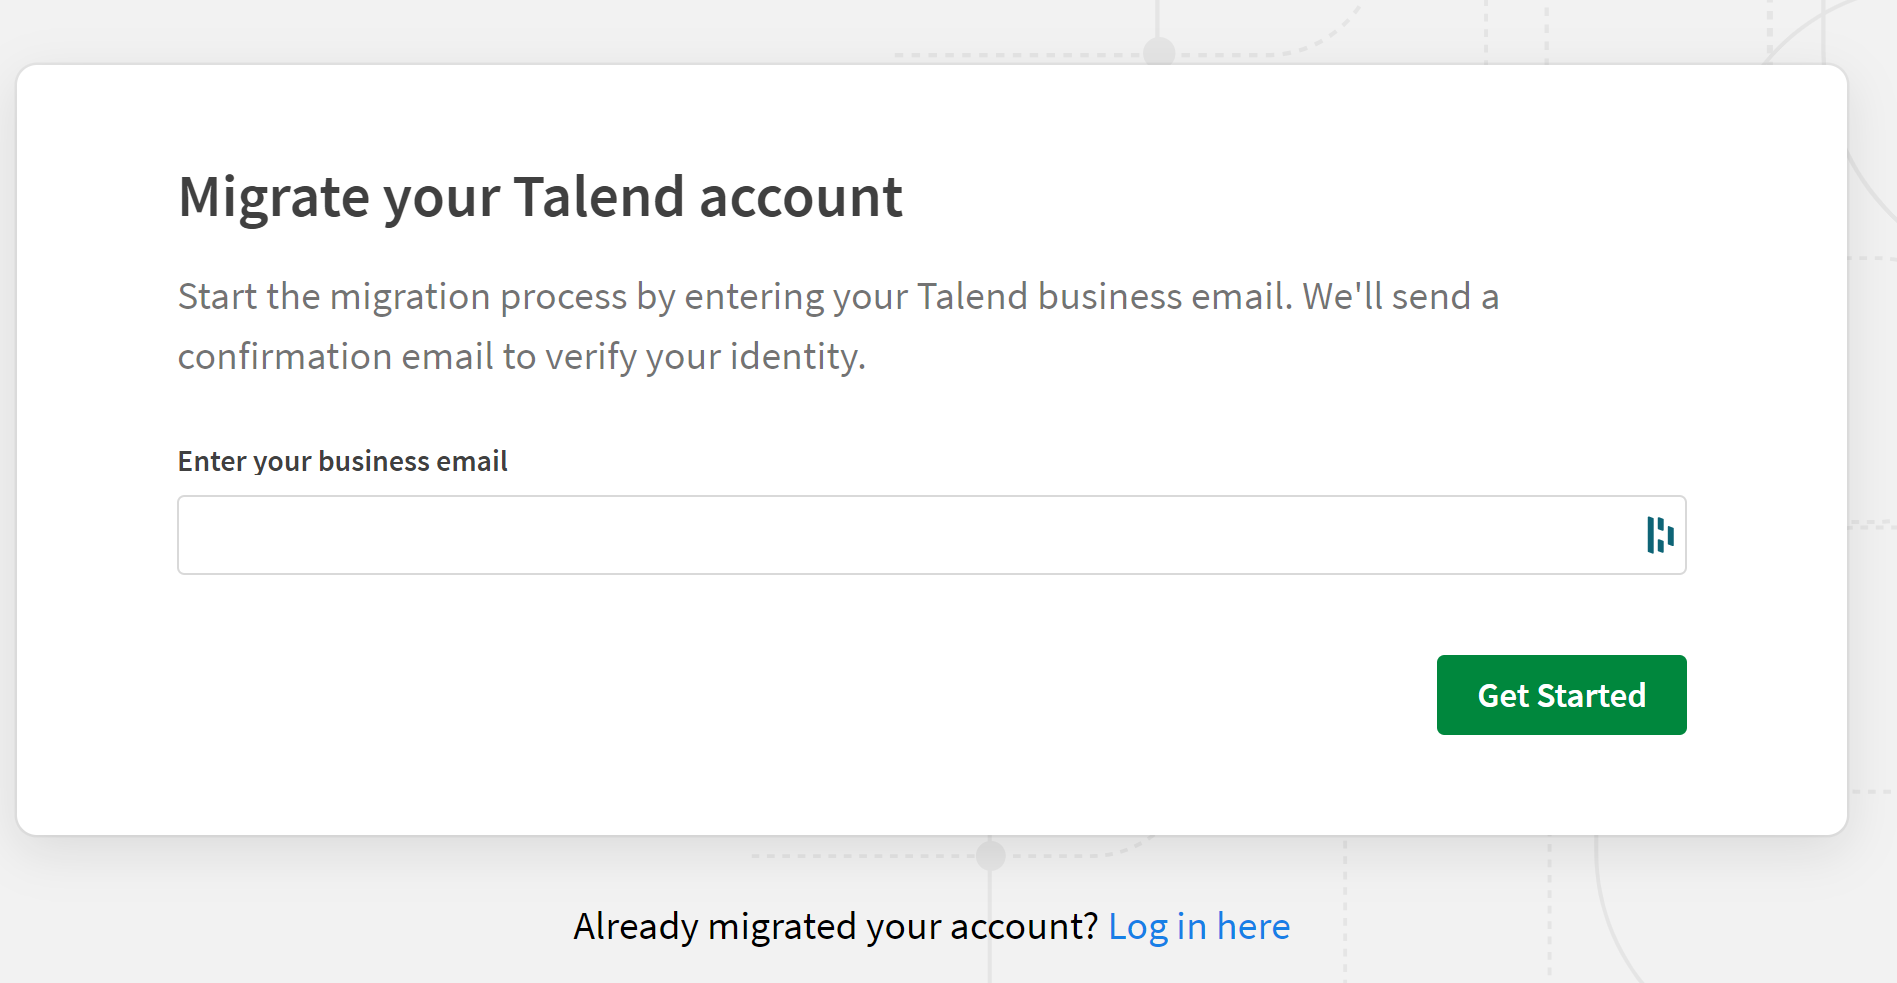 This is the wizard to enter your Talend business email for starting the migration.